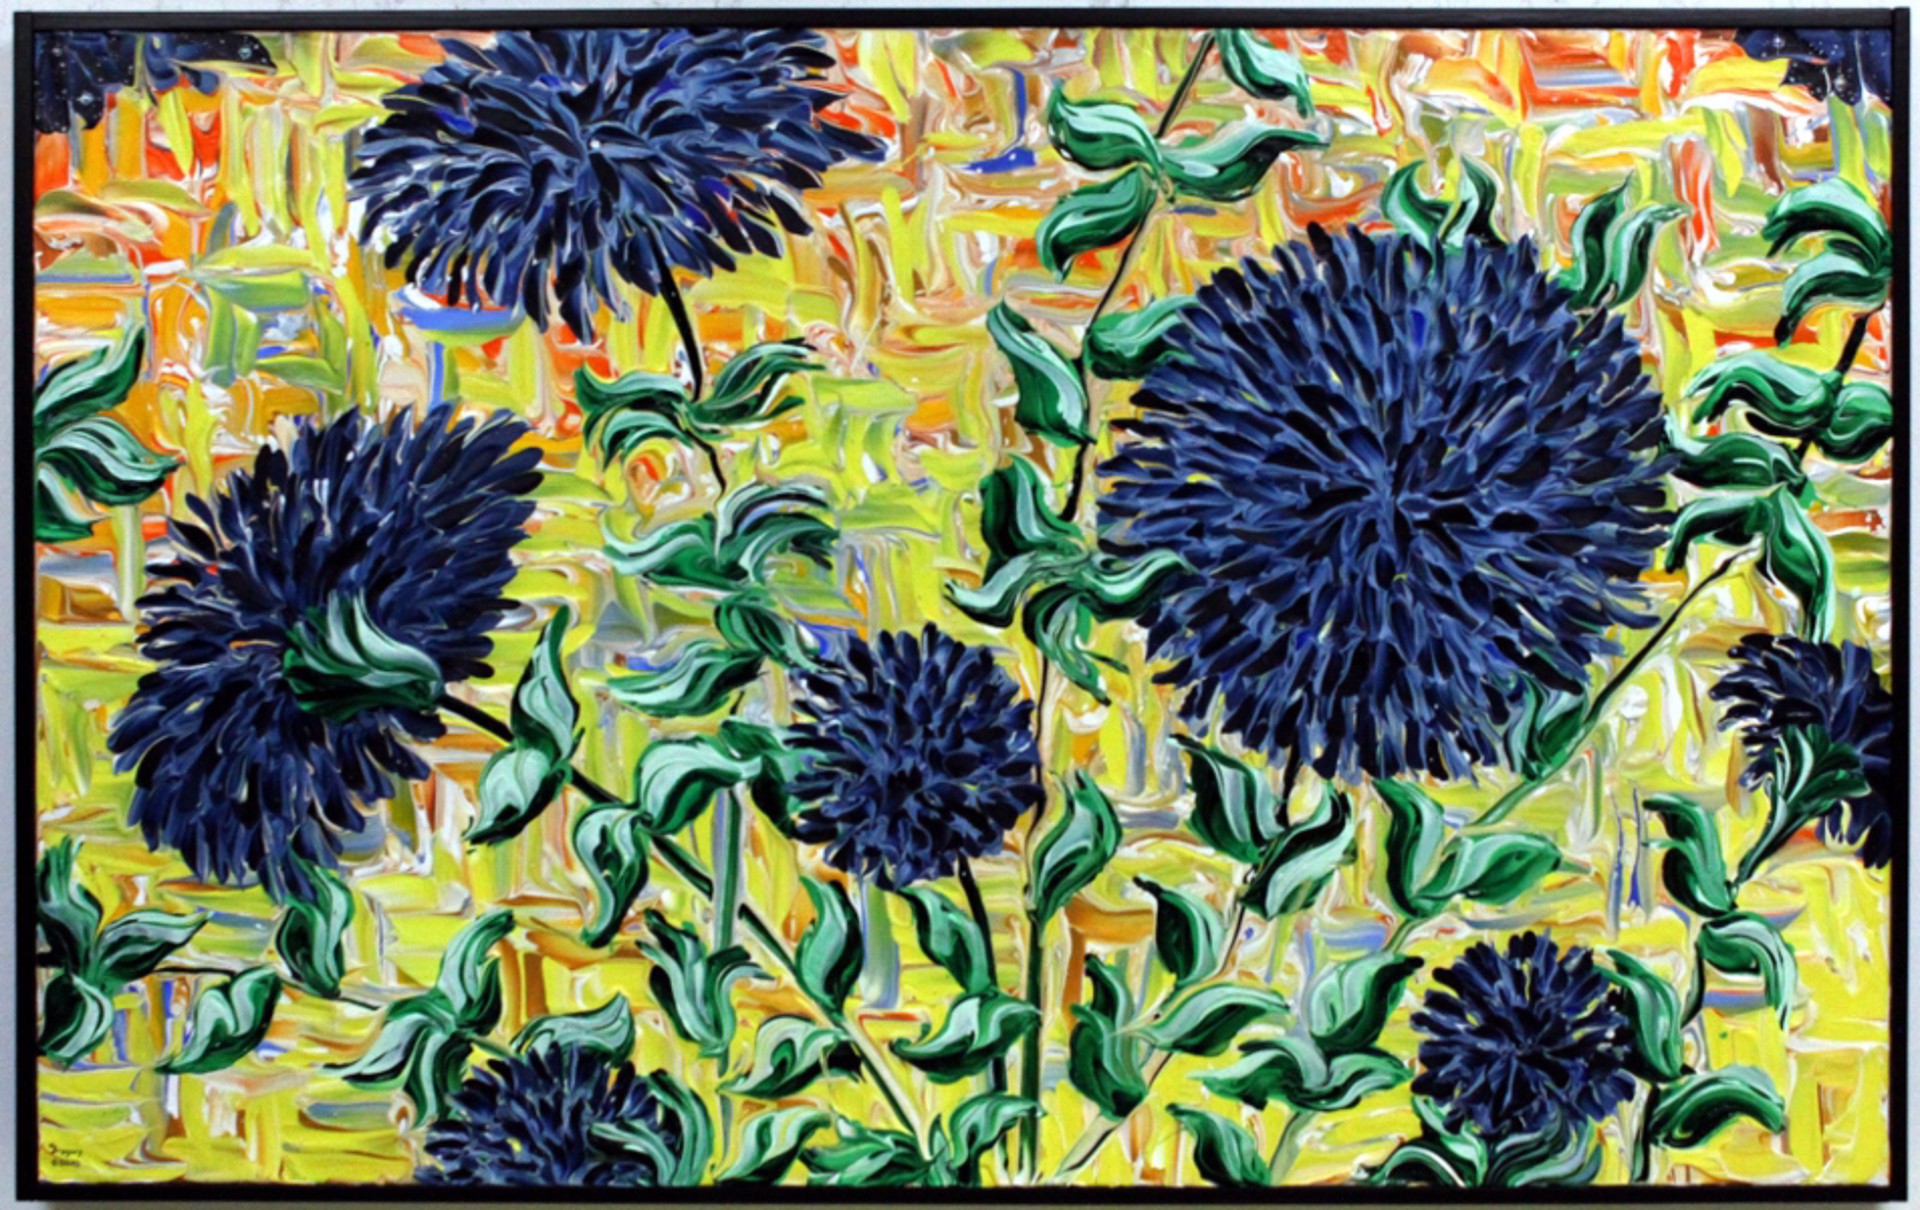 Navy Blue Dahlias with Hatched in Yellowish Sky by Gregory Horndeski